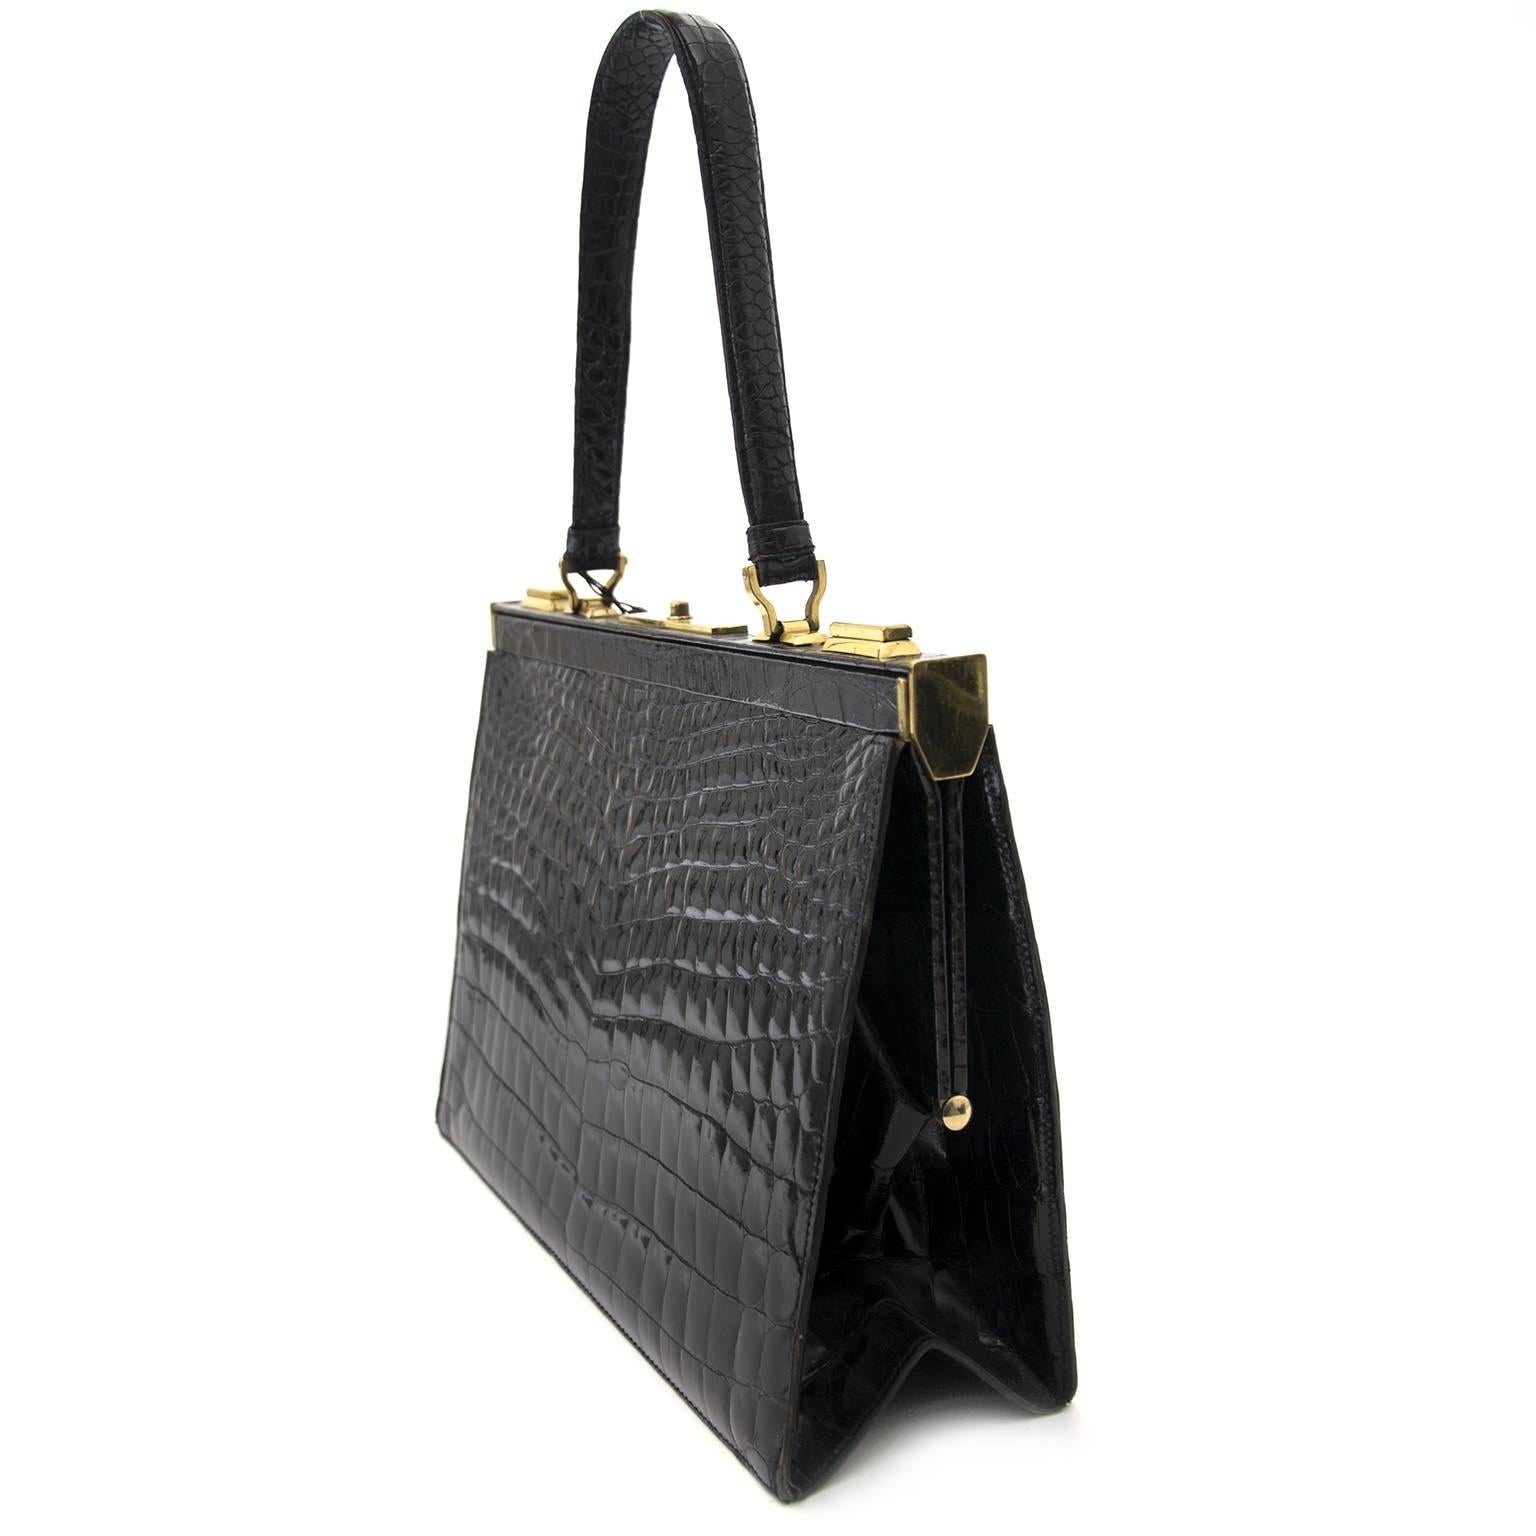 Good preloved condition

Delvaux 'Mon Grand Bonheur' Croco Top Handle Bag

This beautiful Delvaux top handle bag comes in black croco leather.

The bag has one leather top handle and closes with a push lock.

The interior contains one large